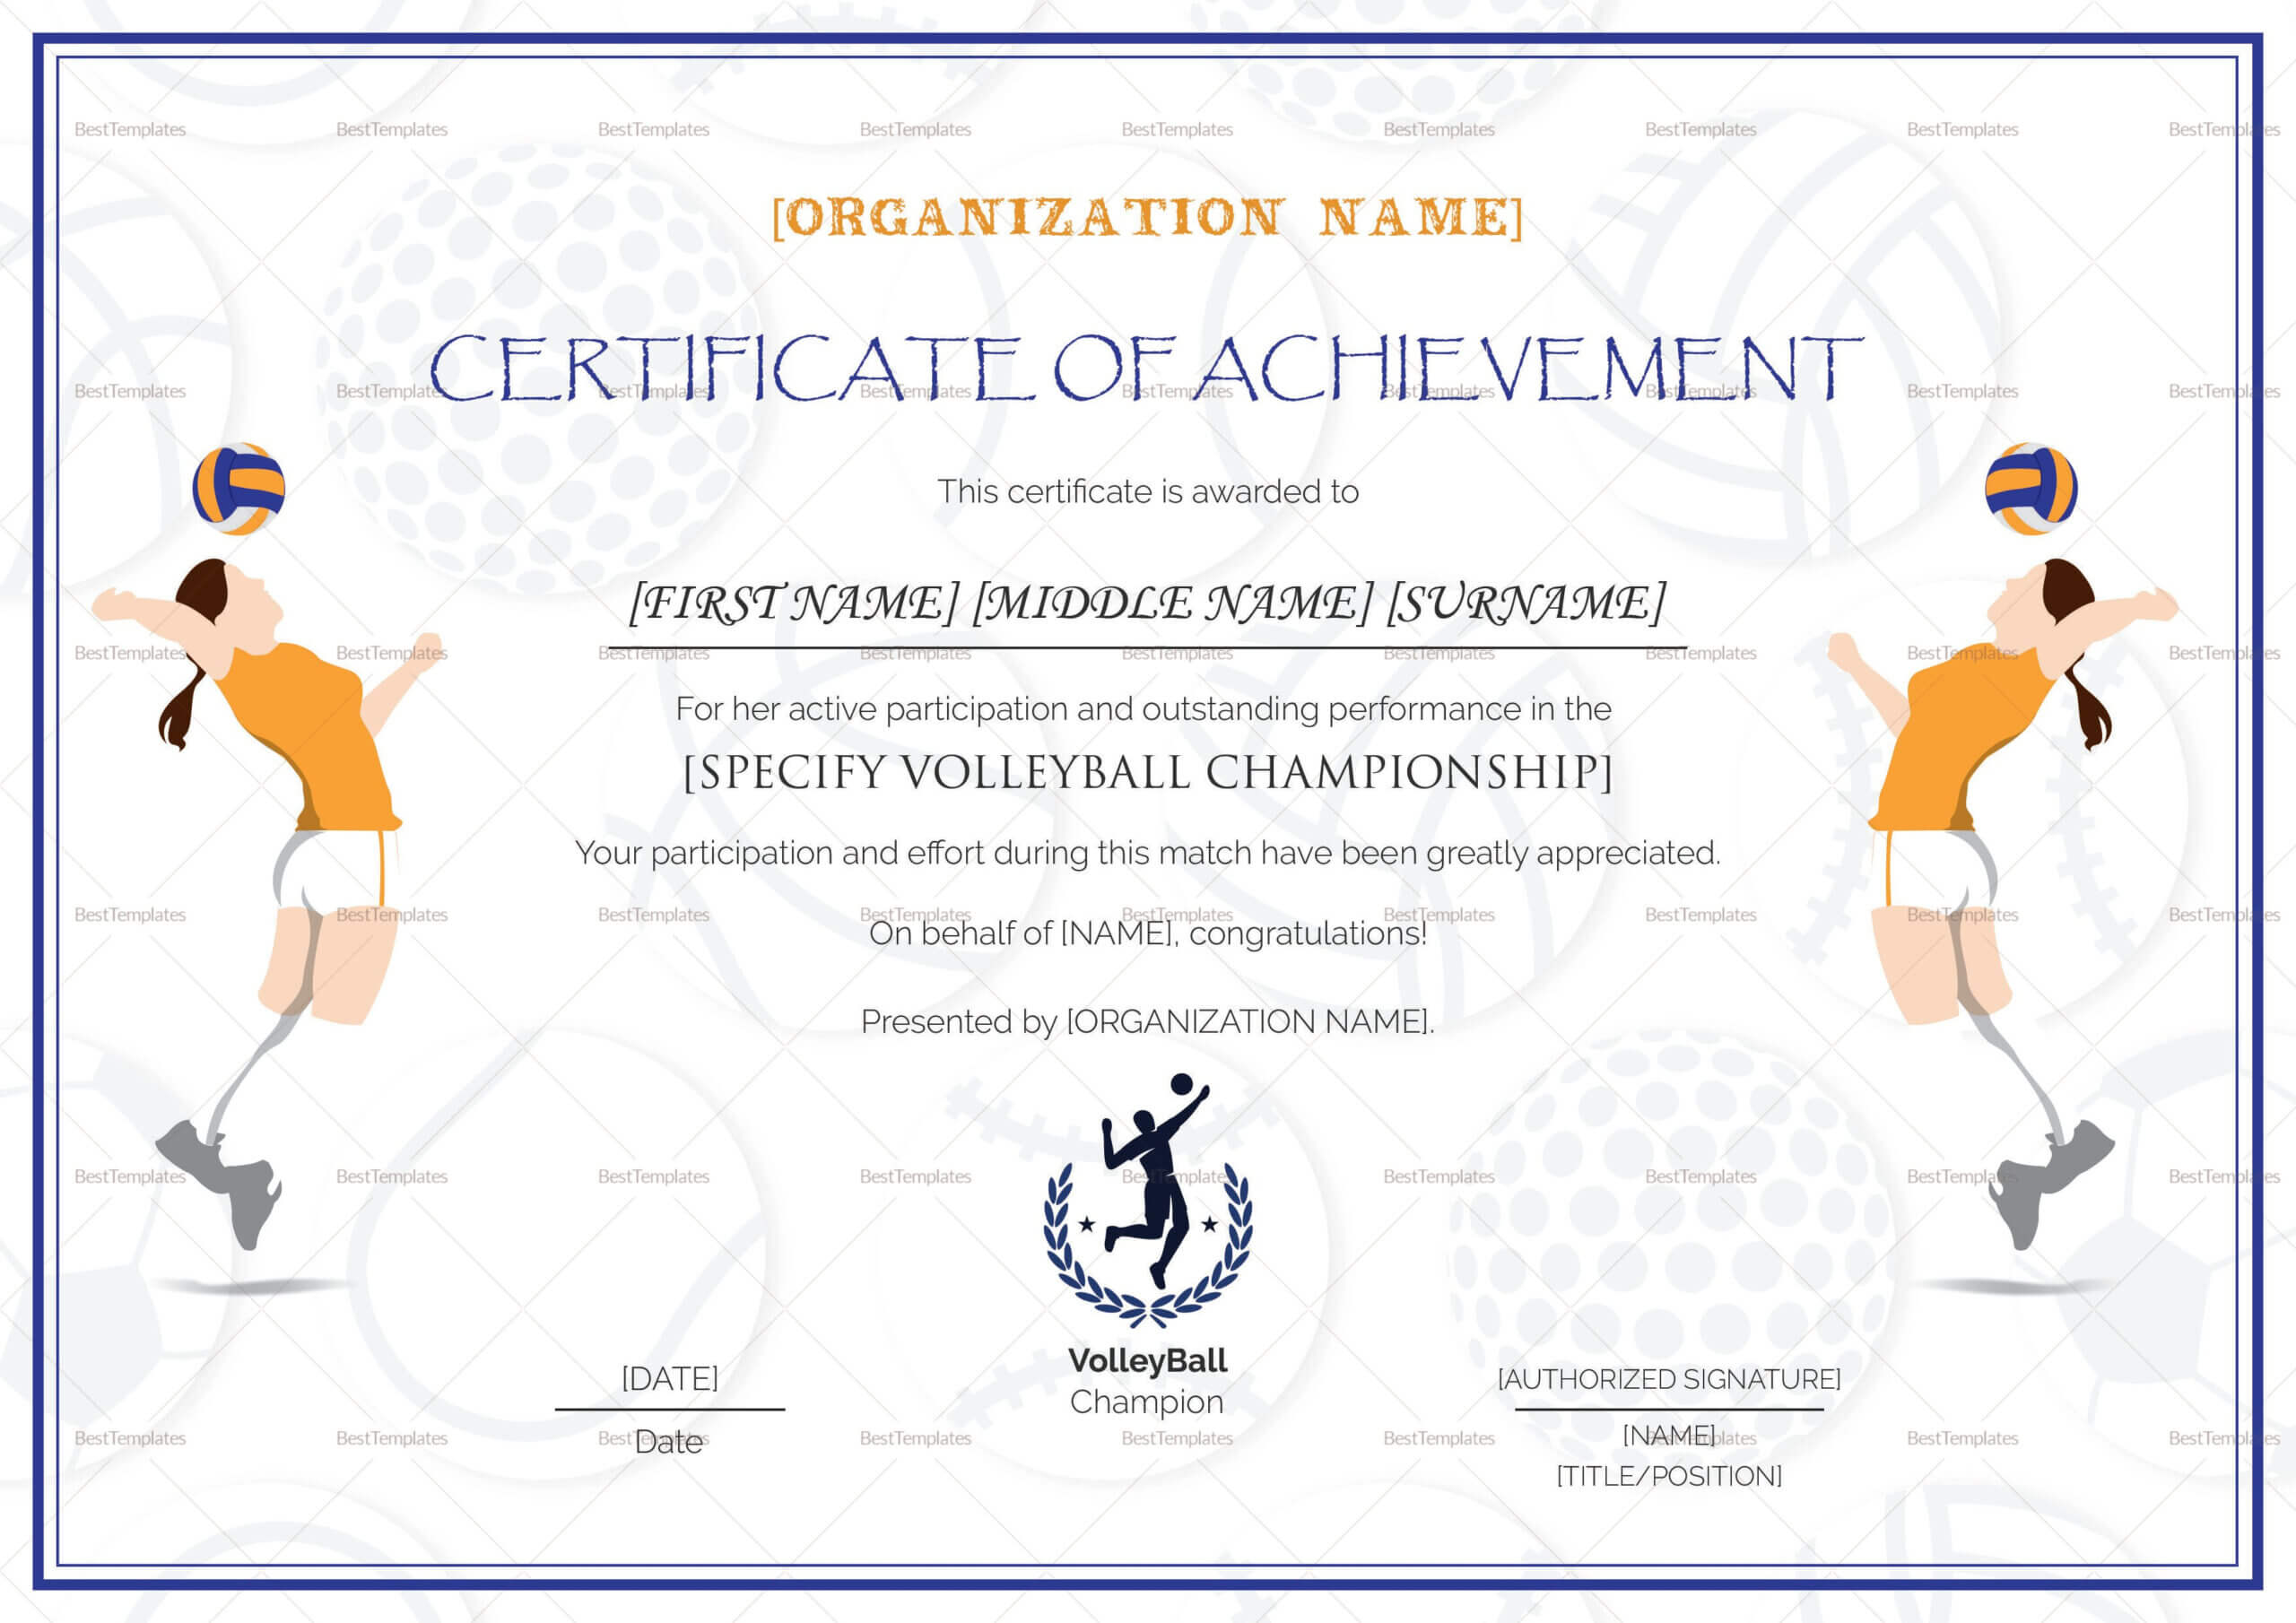 Beautiful Volleyball Certificate Templates – Superkepo Within Beautiful Certificate Templates